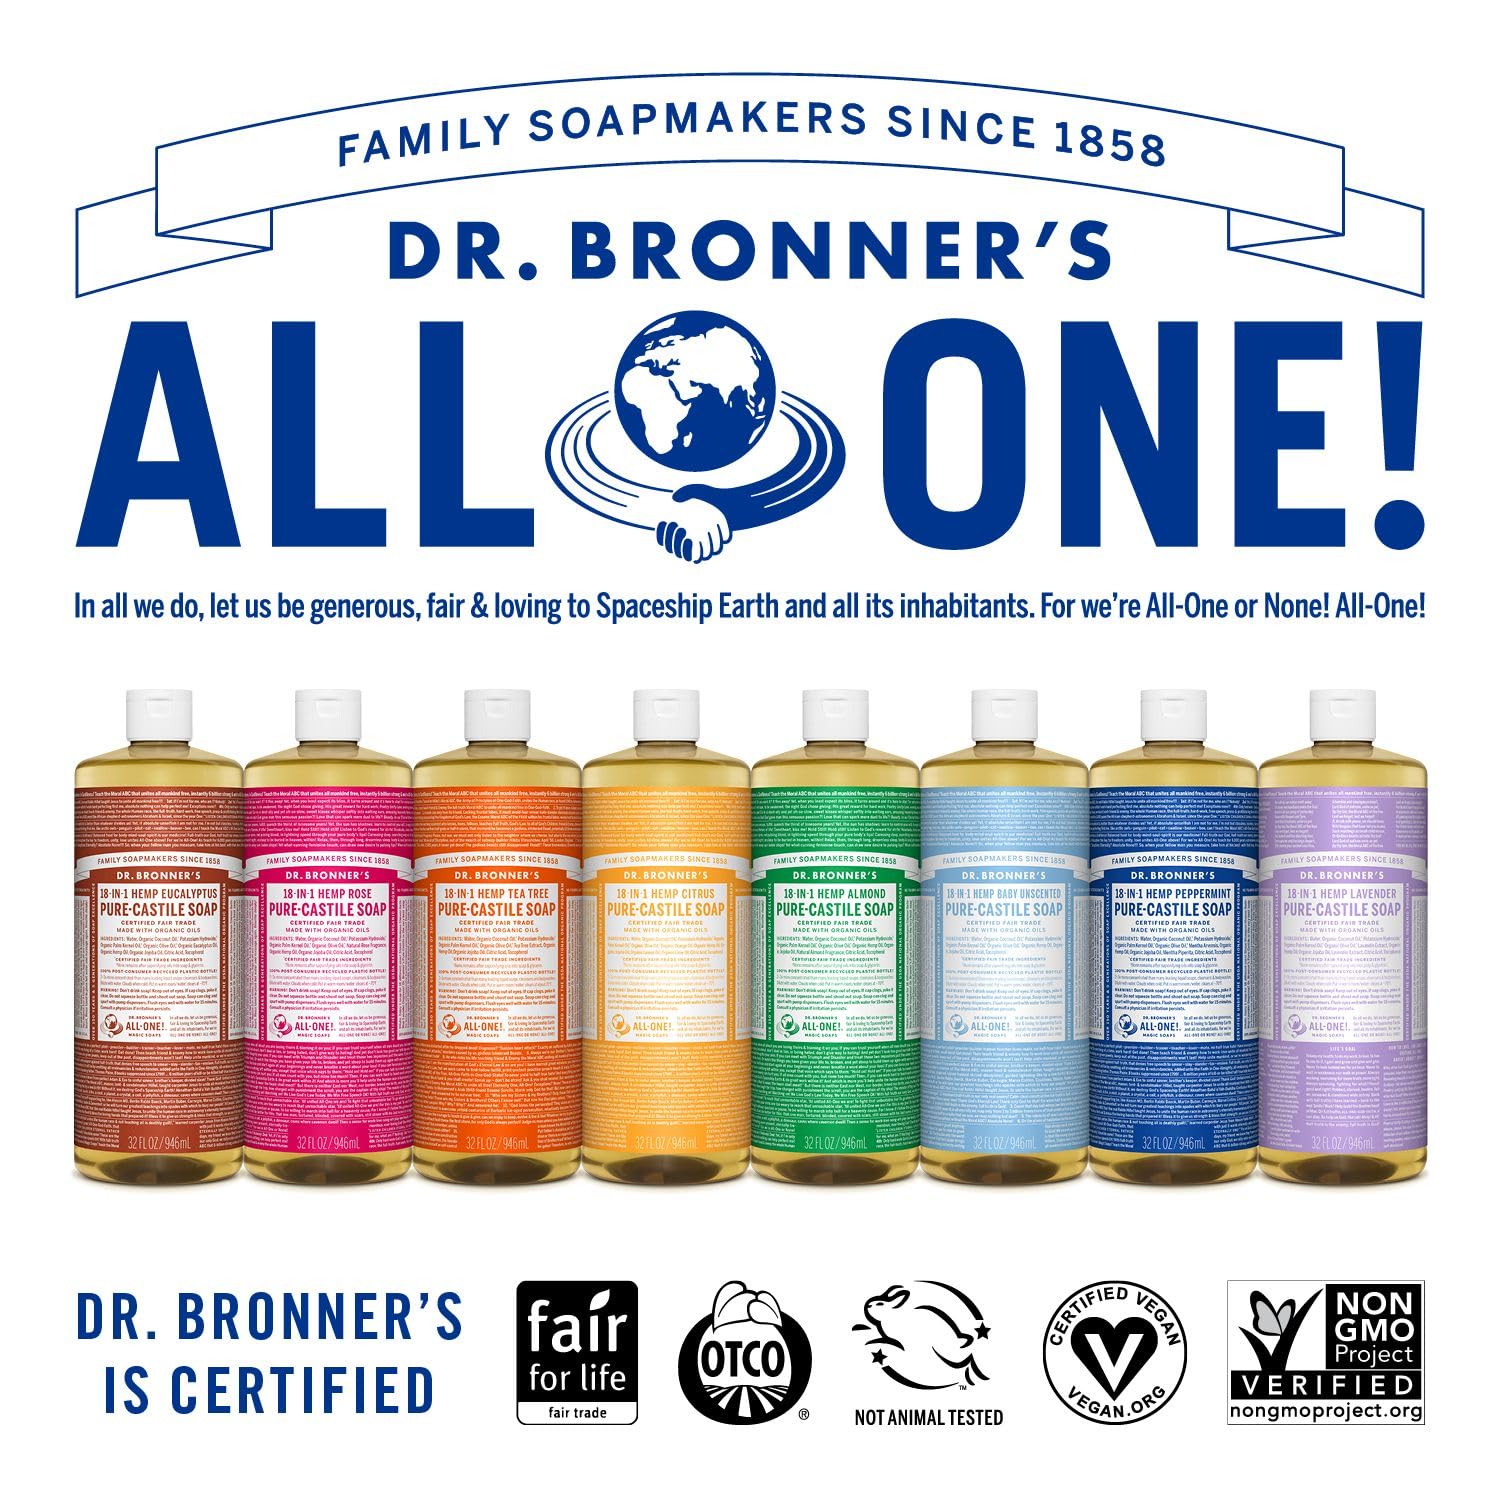 Dr. Bronner's - Pure-Castile Liquid Soap (Almond, 32 ounce) - Made with Organic Oils, 18-in-1 Uses: Face, Body, Hair, Laundry, Pets and Dishes, Concentrated, Vegan, Non-GMO : Beauty & Personal Care